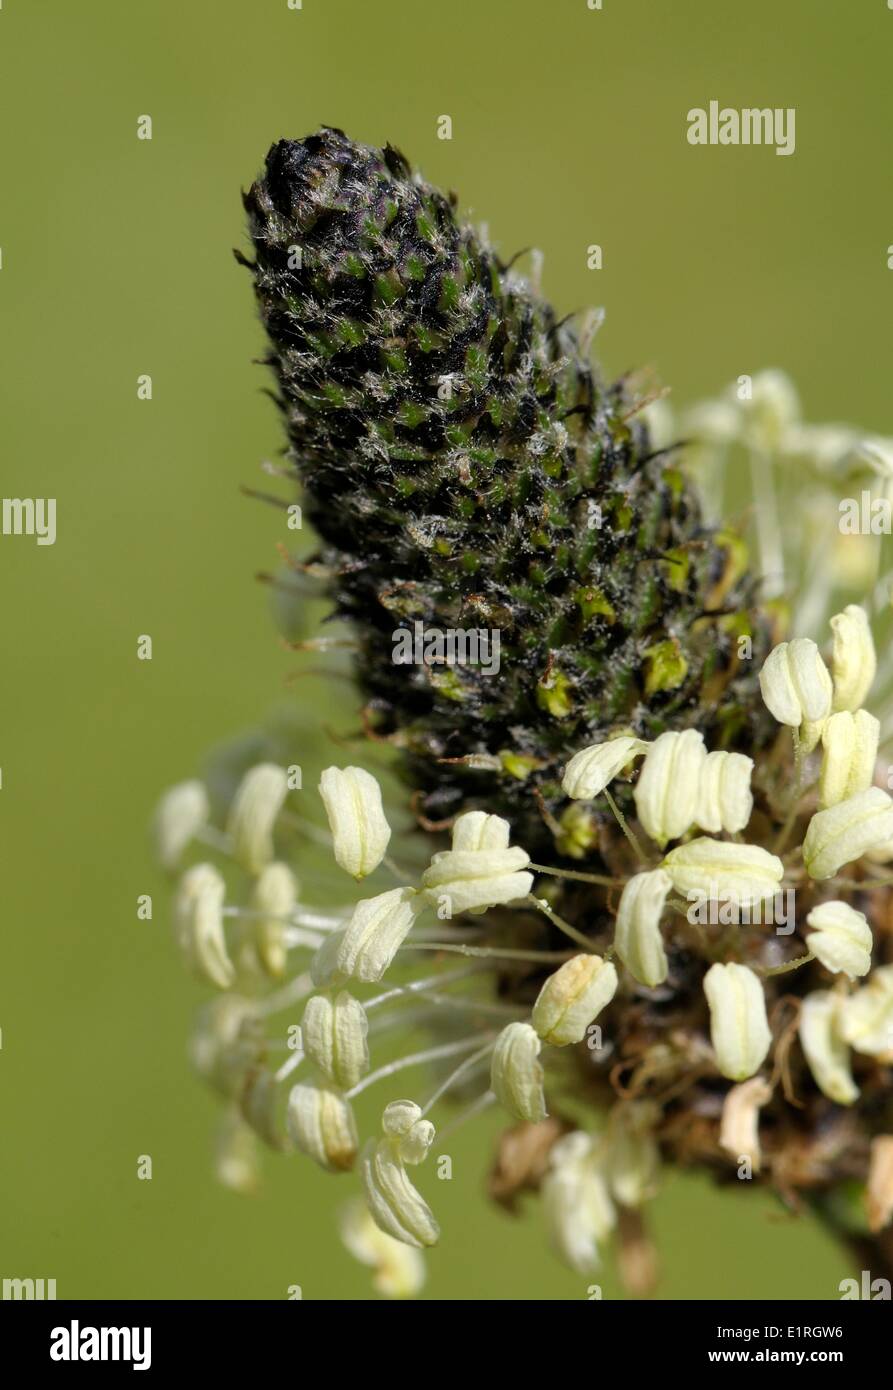 Narrowleaf Plantain flower in close-up Stock Photo